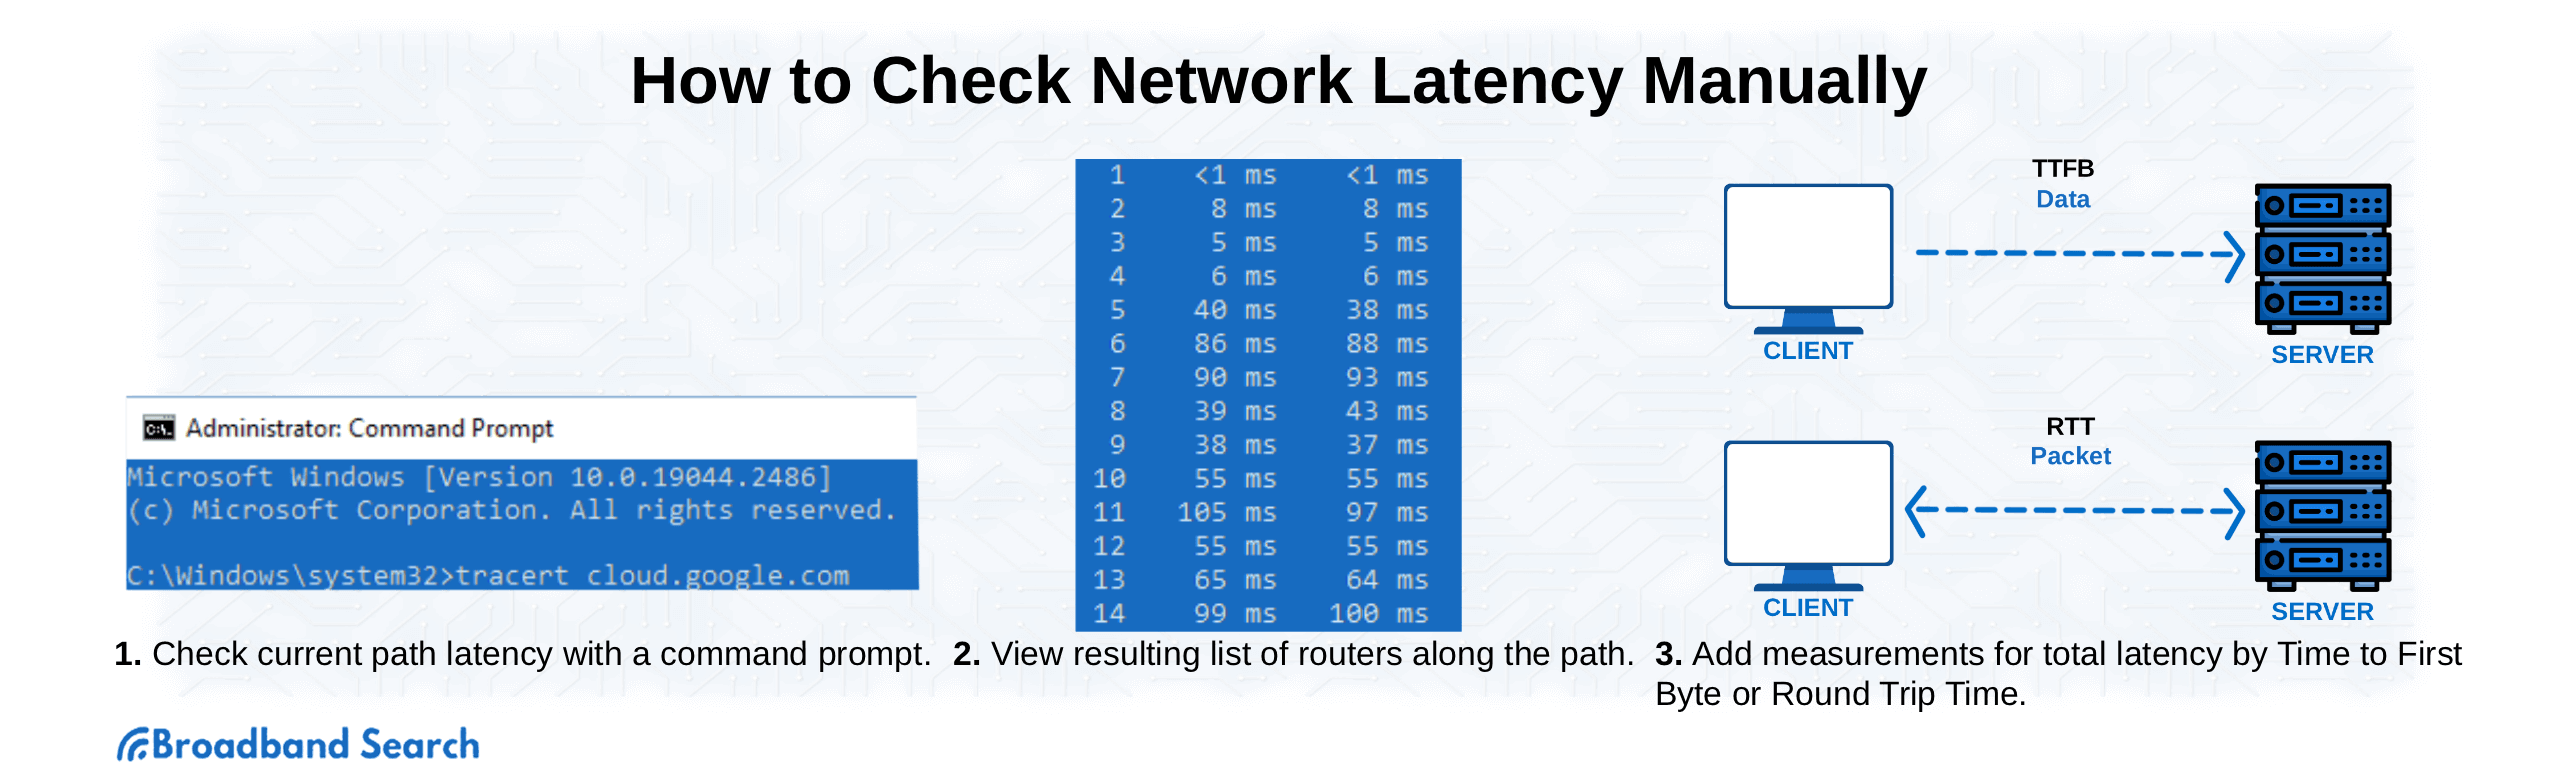 How to check network latency manually